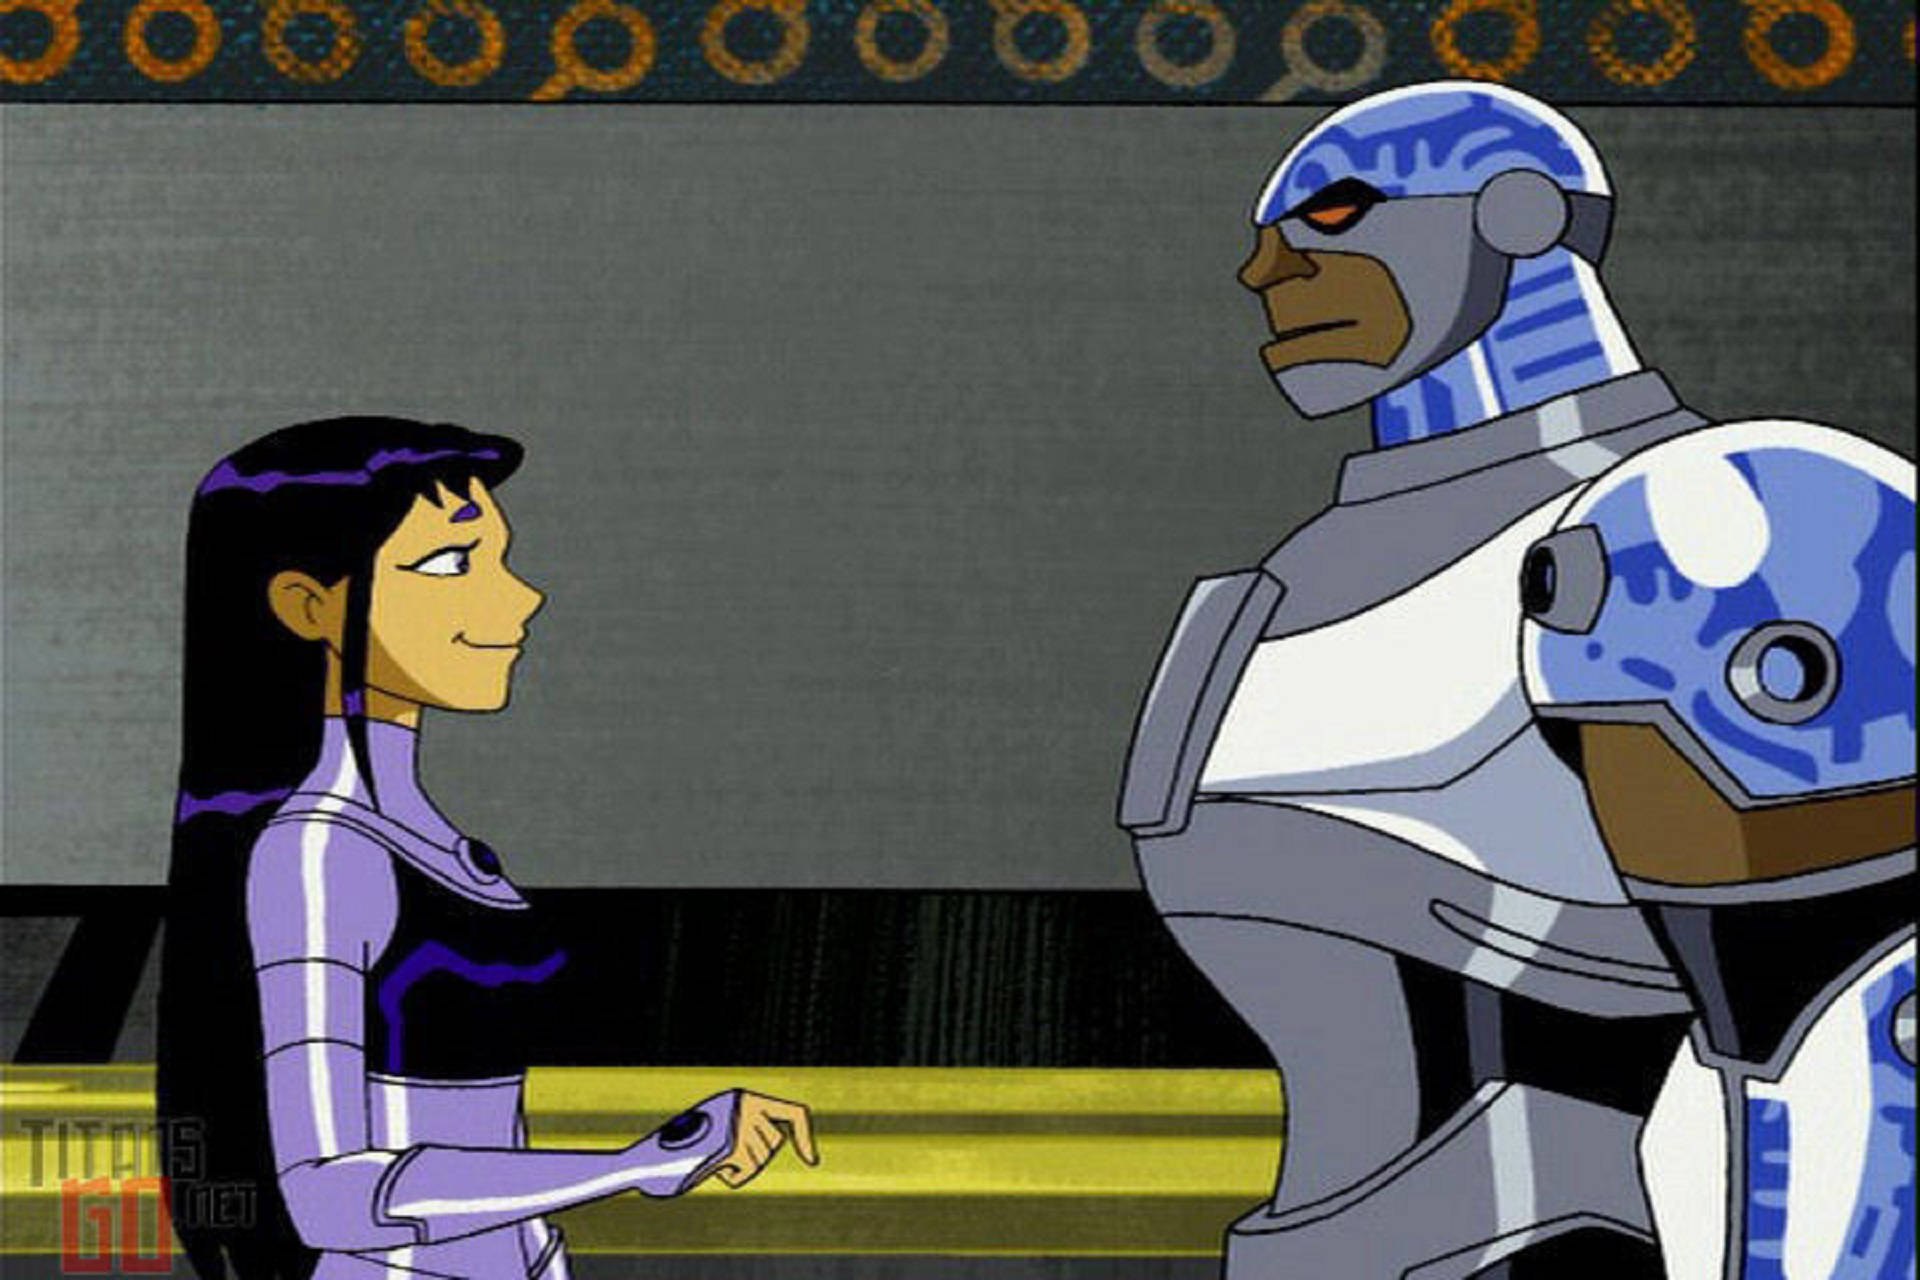 Blackfire And Cyborg - The Dynamic Duo